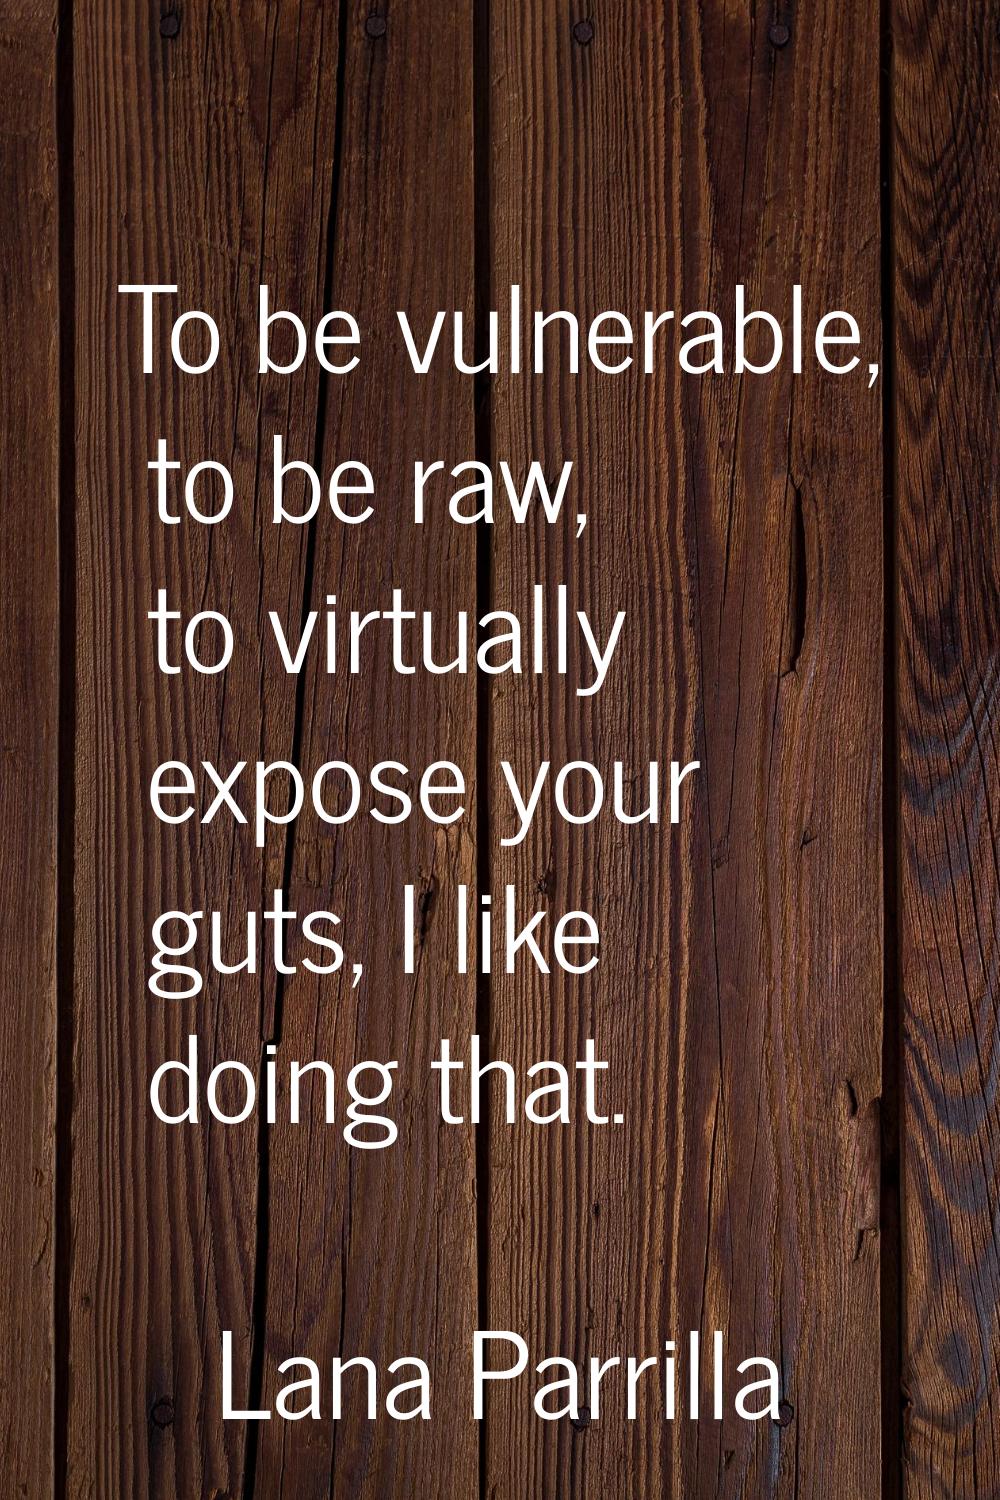 To be vulnerable, to be raw, to virtually expose your guts, I like doing that.